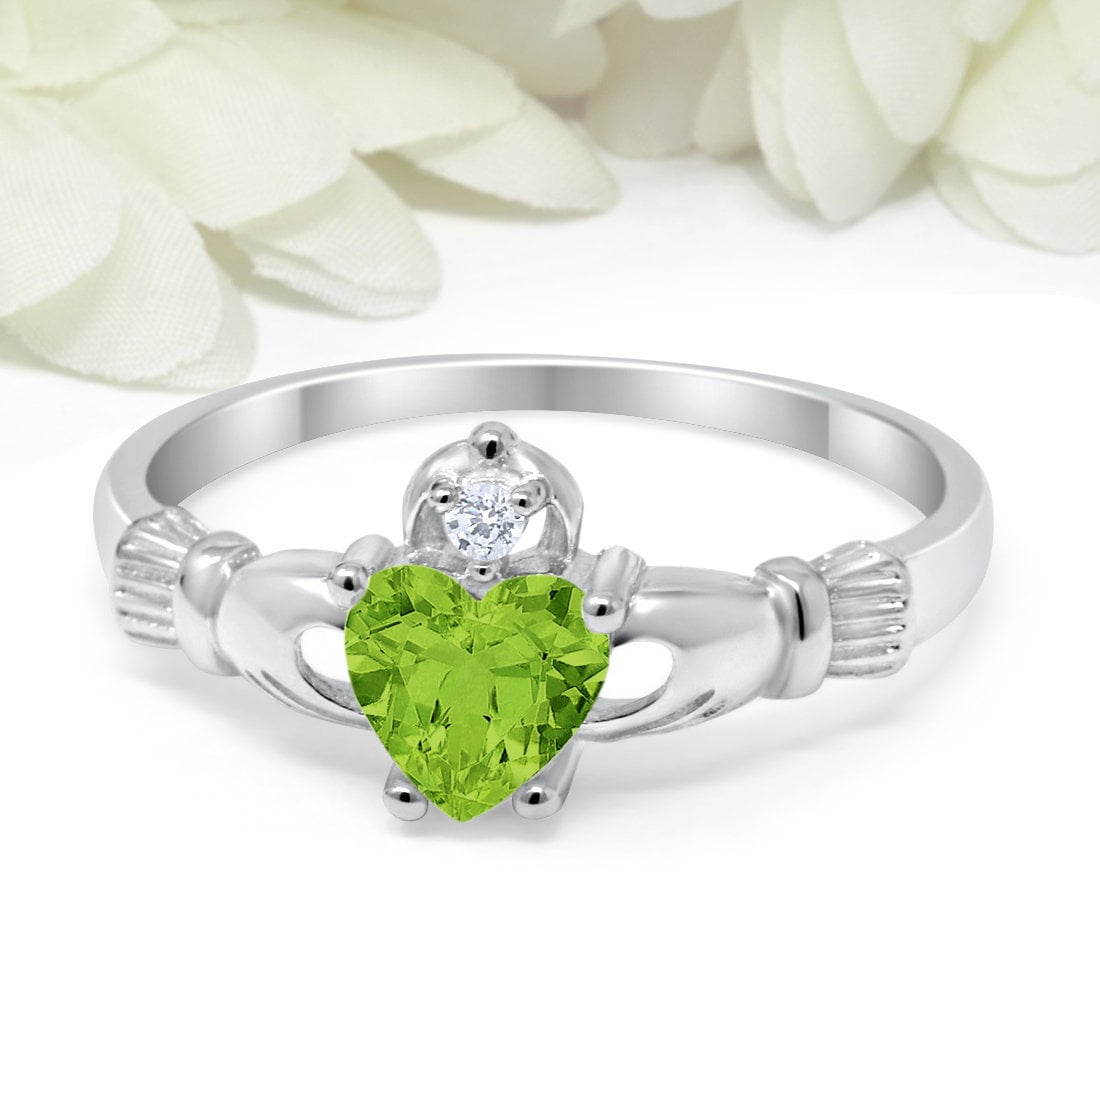 .925 Sterling Silver Irish CZ Stone Claddagh Promise Ring Size 5 6 7 8 9 10